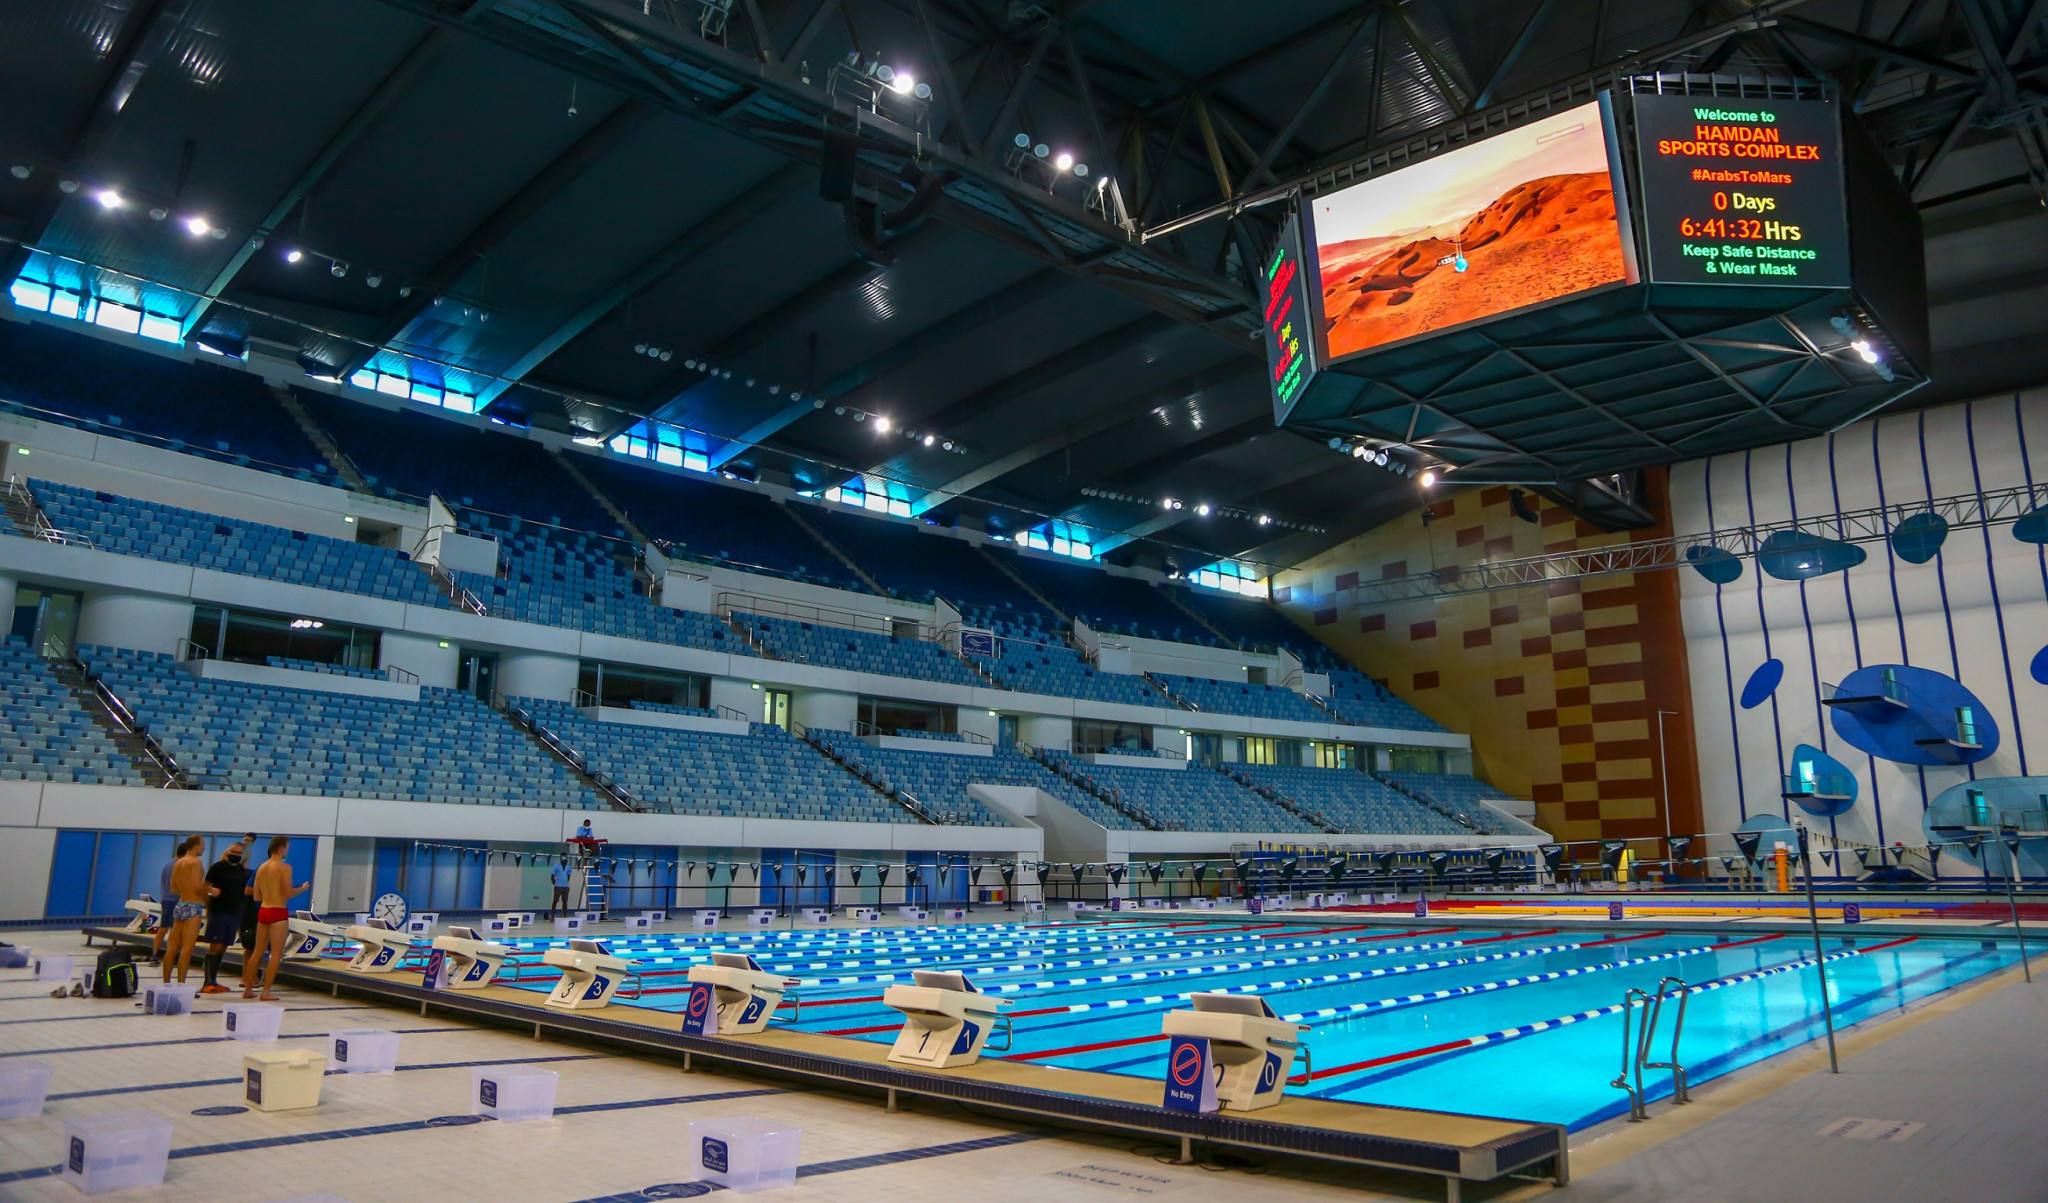 The Hamdan Sports Complex is considered one of the biggest multi-sport facilities in the world ©DSC